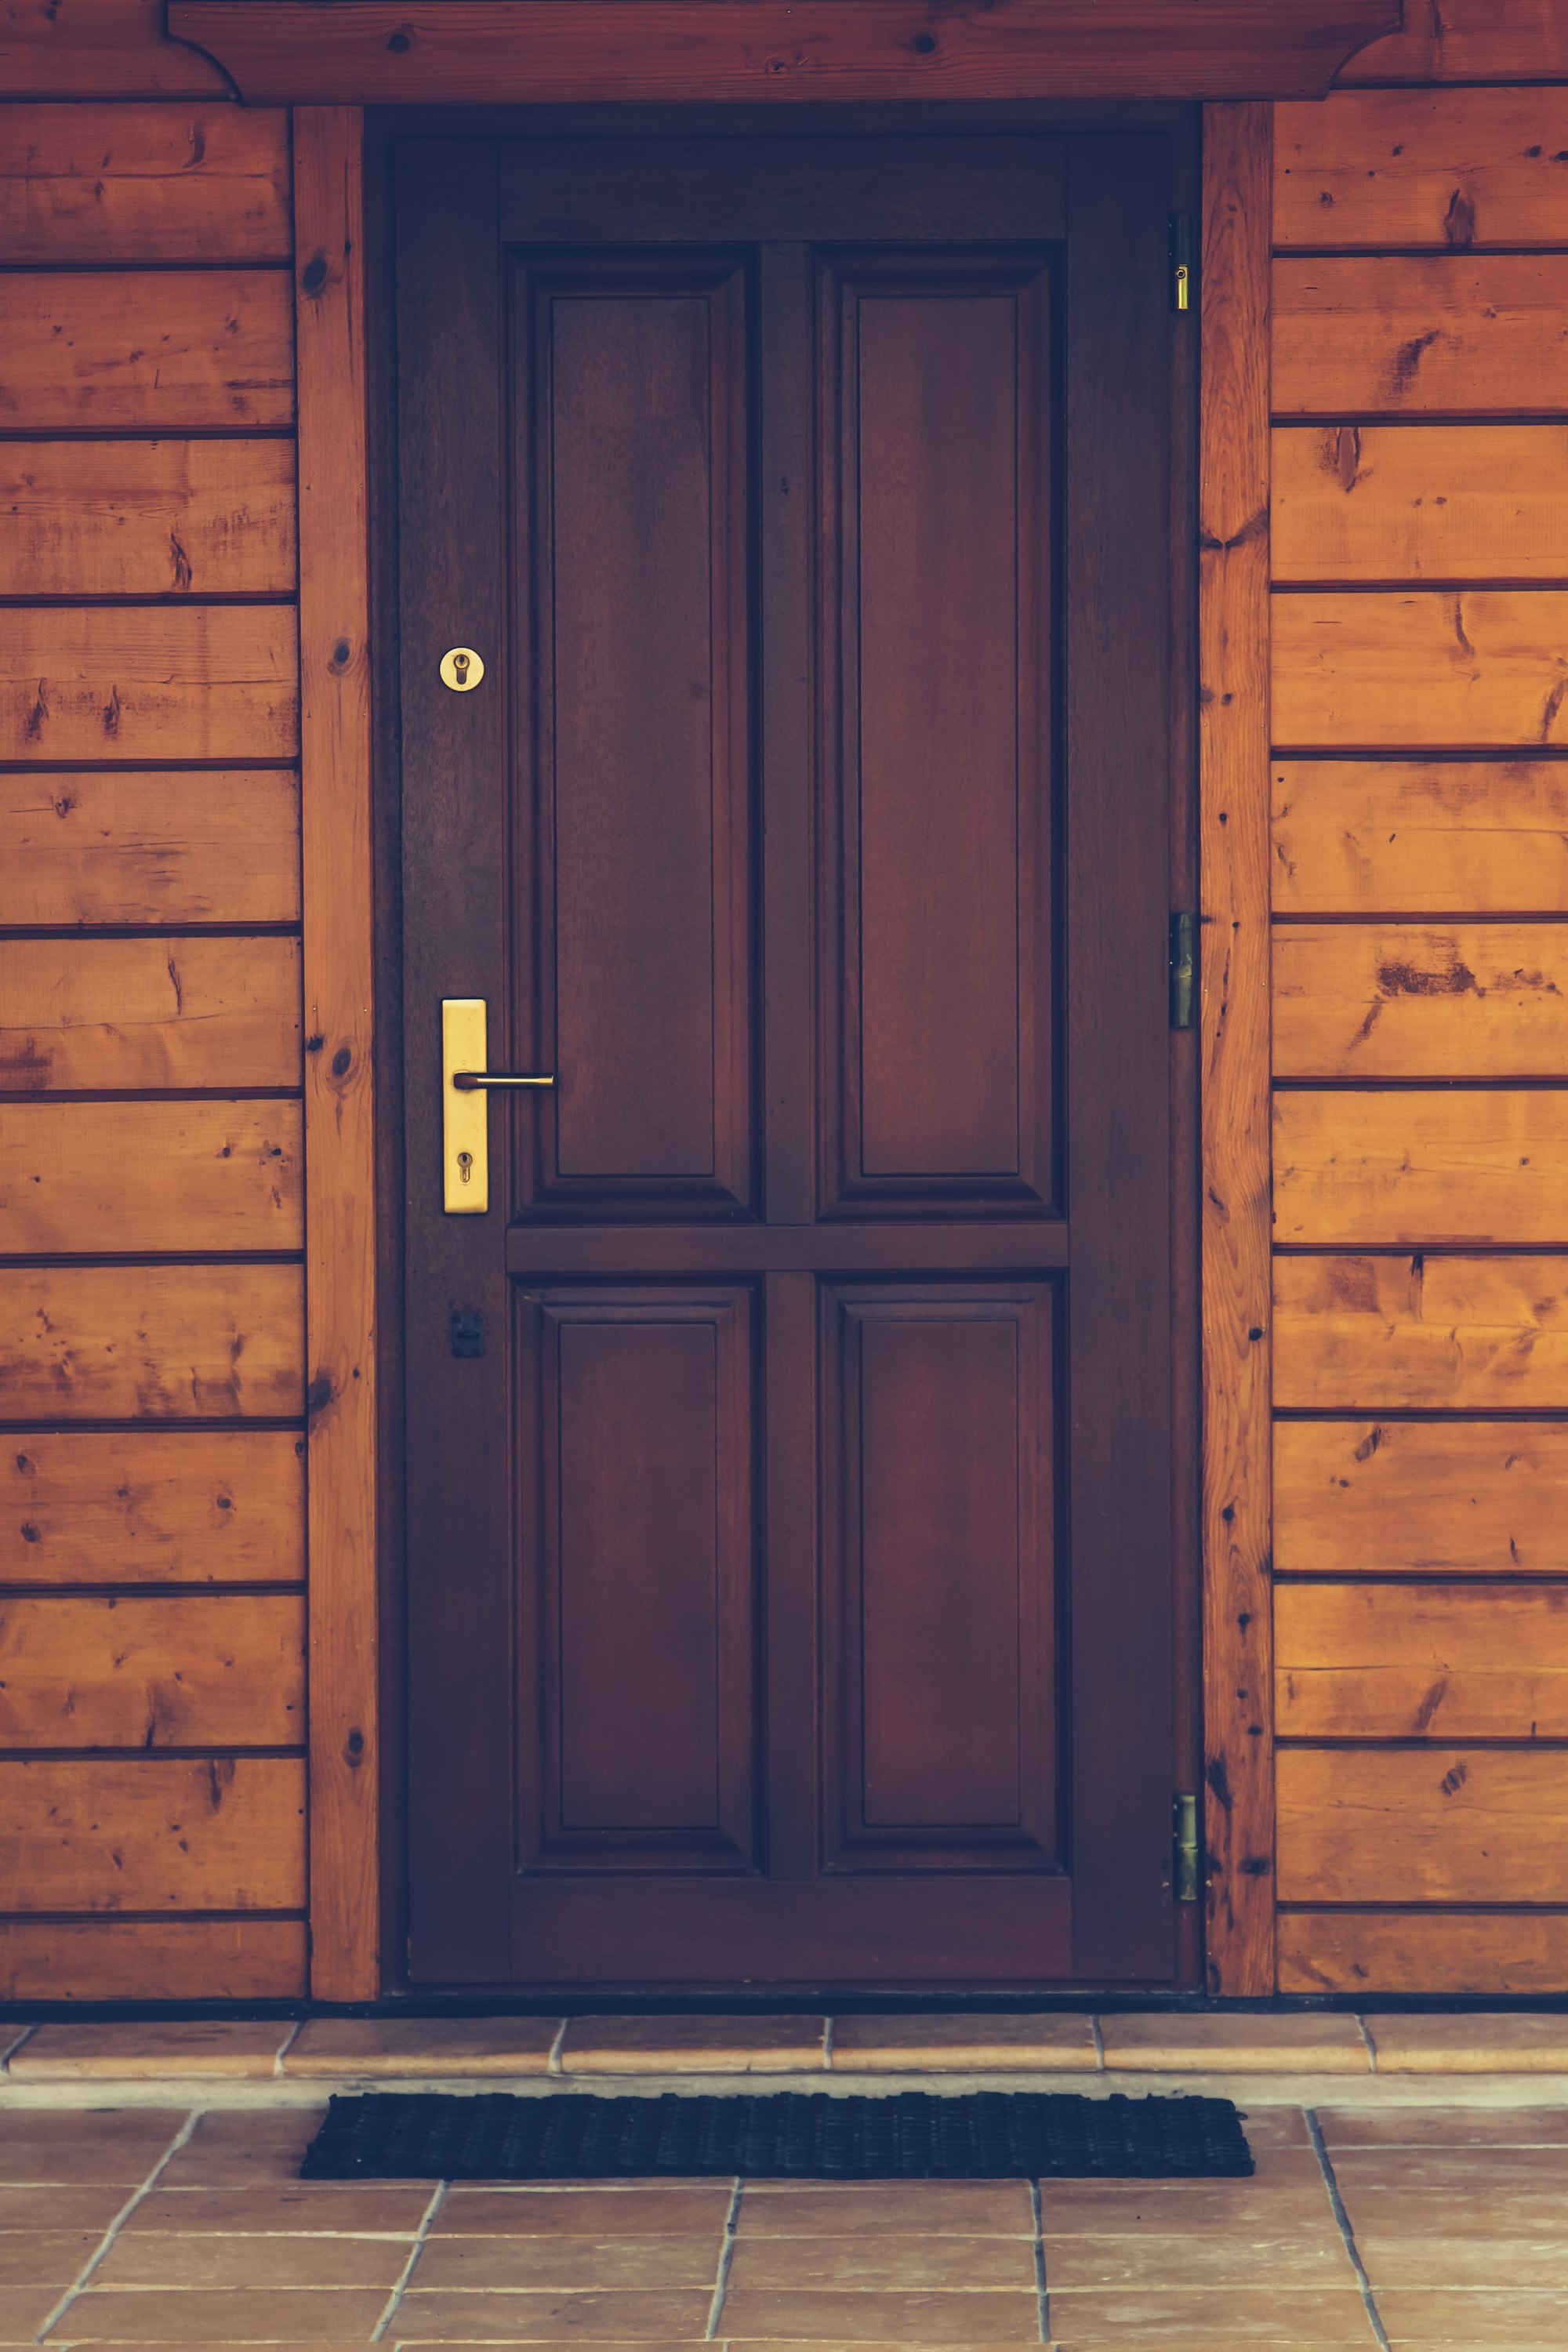 Photo of a brown door in a wooden house